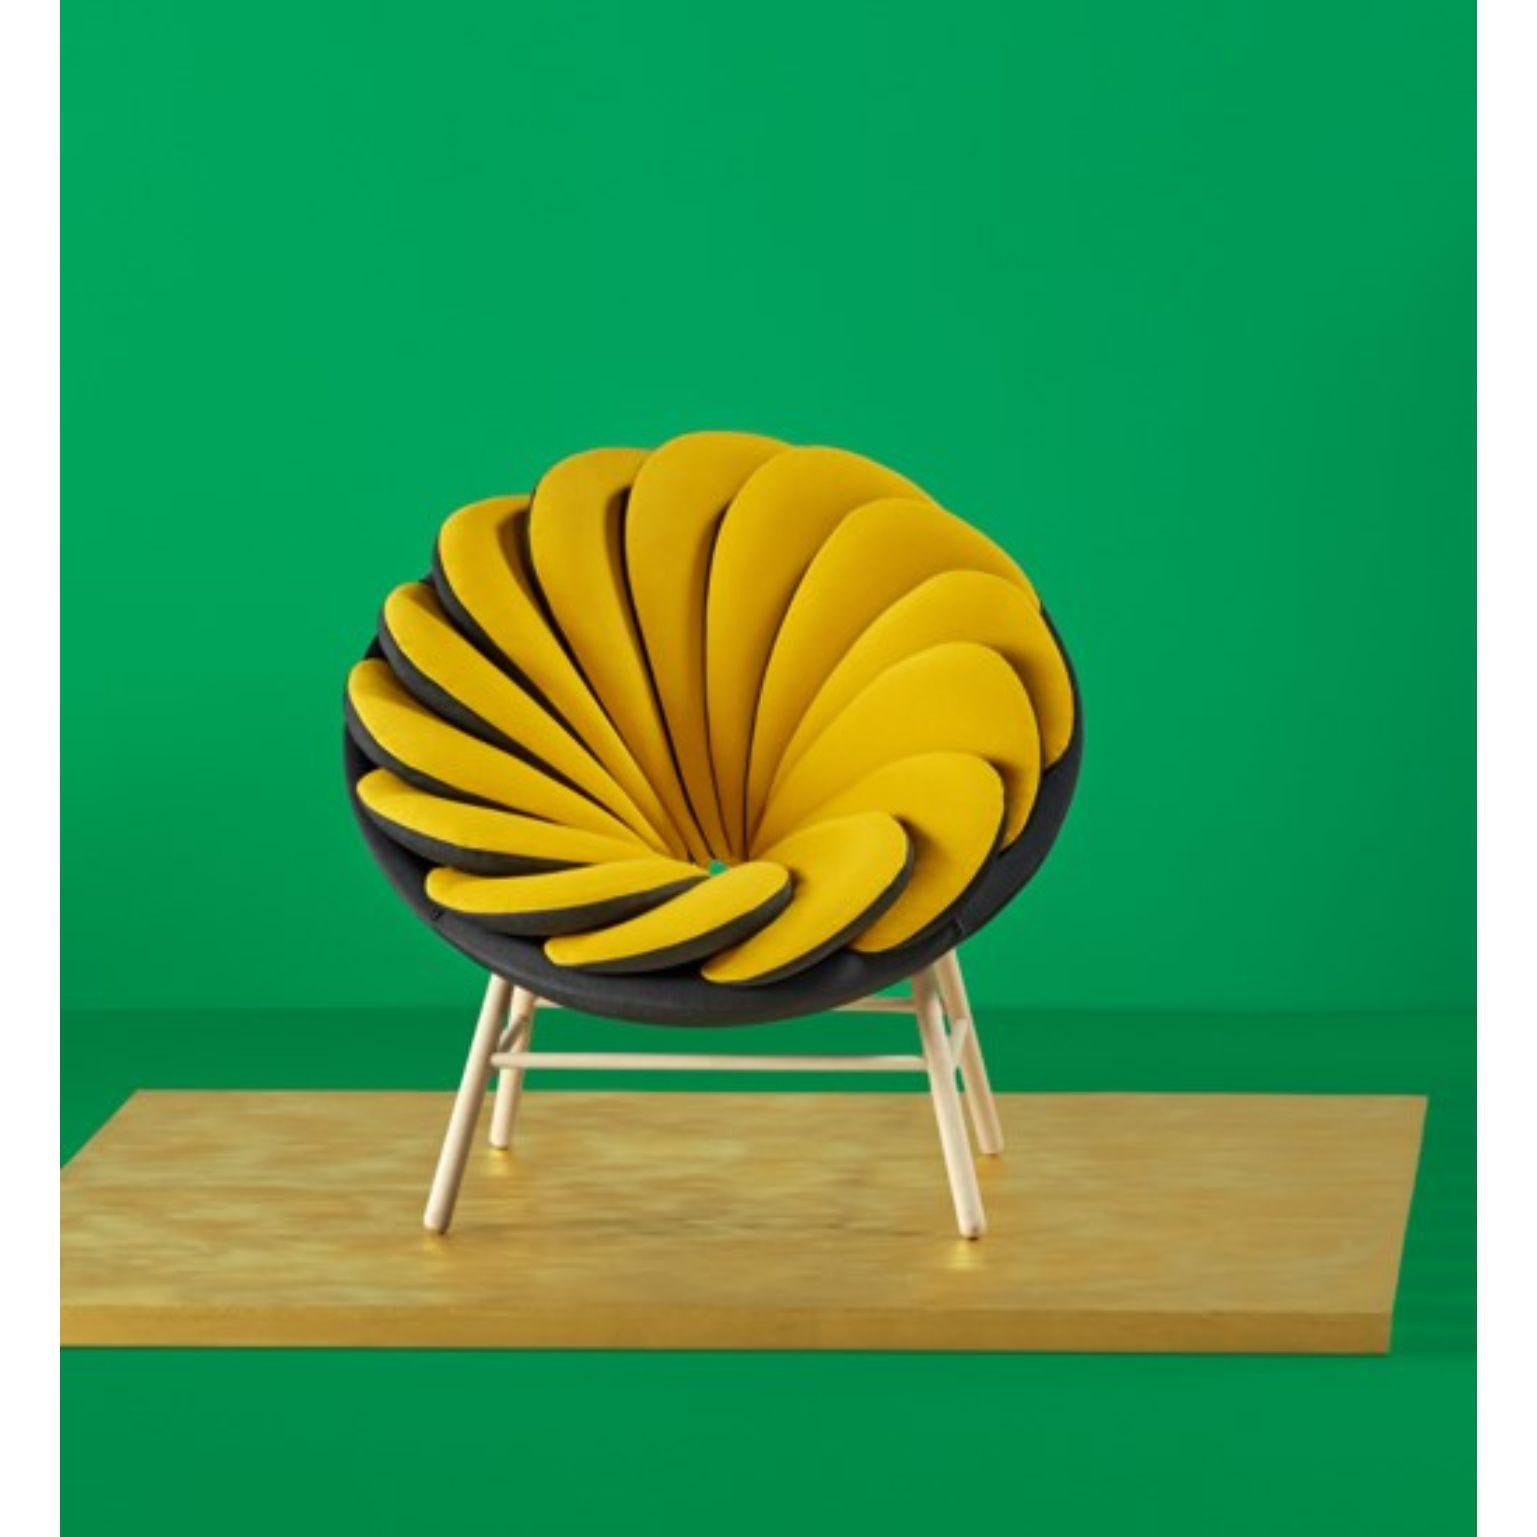 Quetzal armchair, yellow by Pepe Albargues
Dimensions: W100, D100, H90, Seat 42
Materials: Iron structure
Foam CMHR (high resilience and flame retardant) for all our cushion filling systems
Wooden legs

Quetzal is a very visual armchair giving